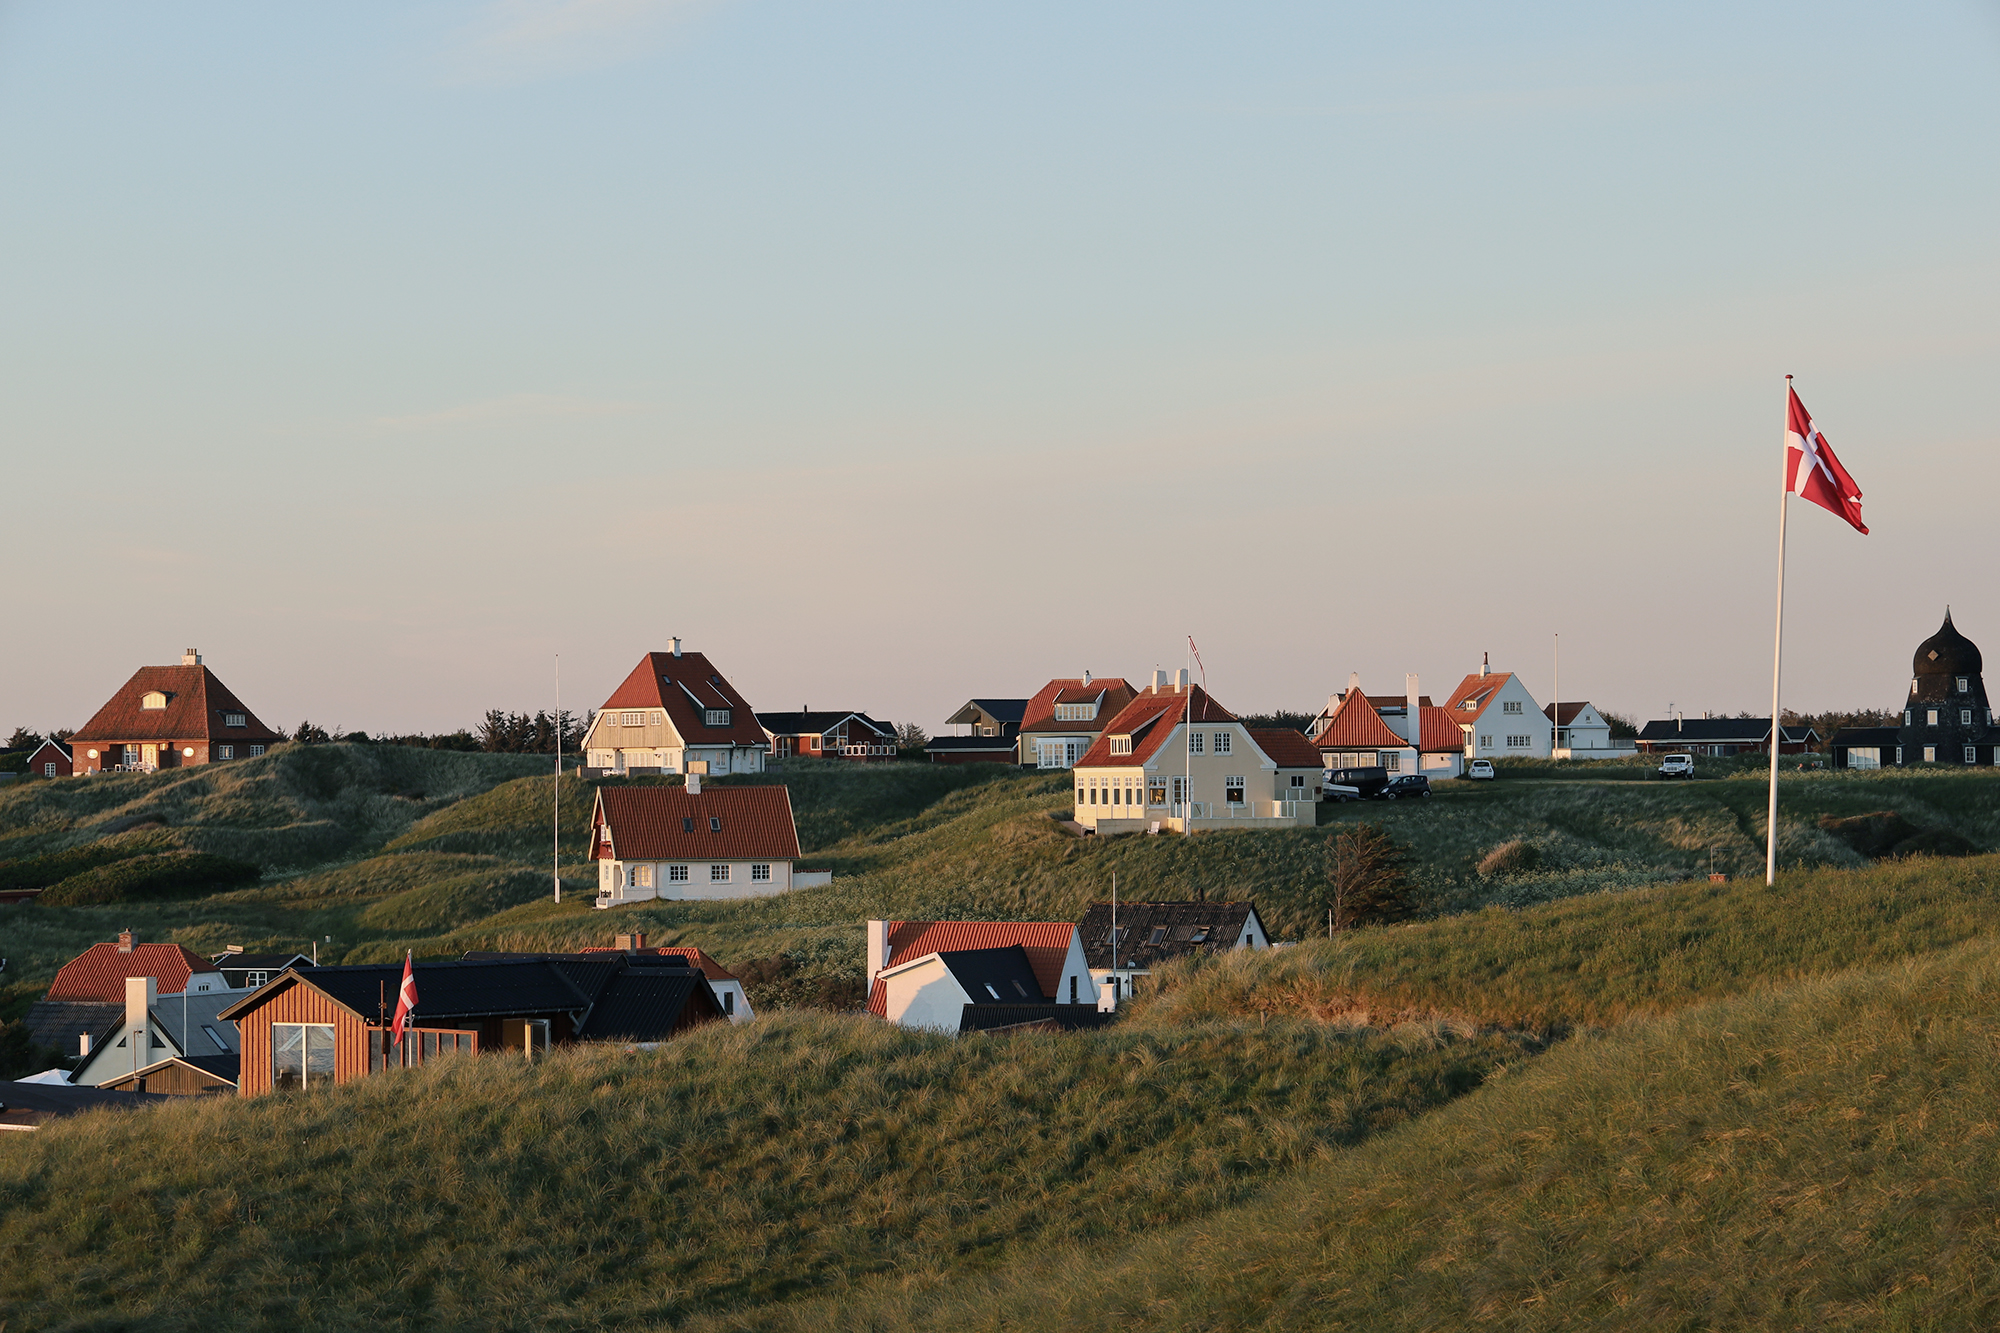 A picturesque scene of white houses on the hill in Lonstrup, Denmark